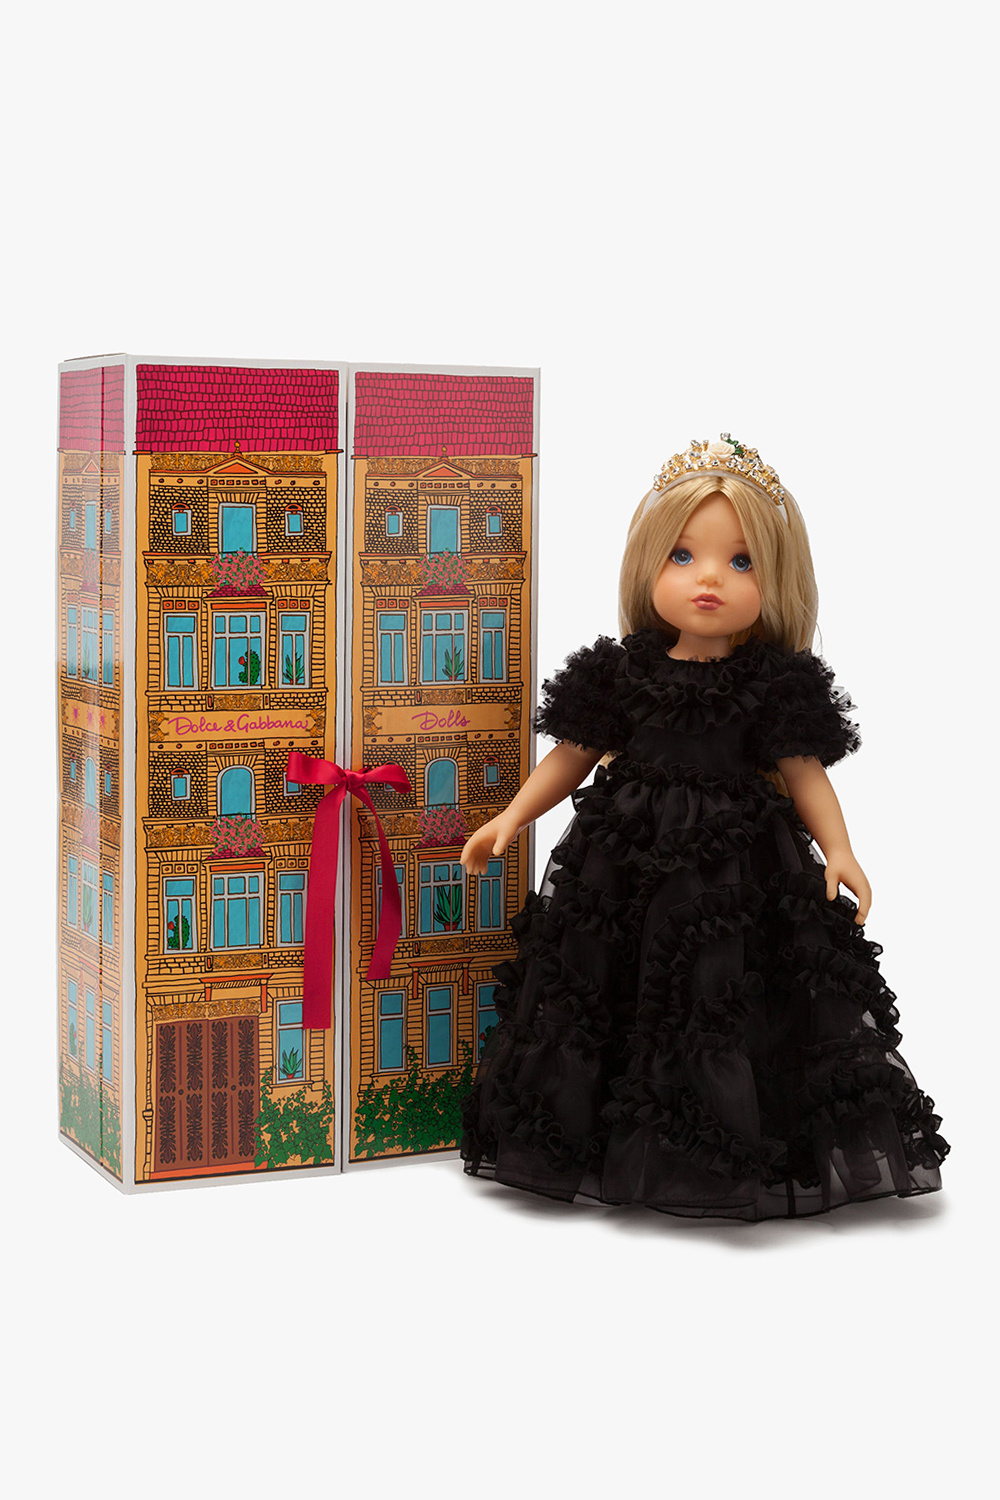 Dolce & Gabbana box pleat lace dress Doll from the ‘Dolls Special Project’ collection